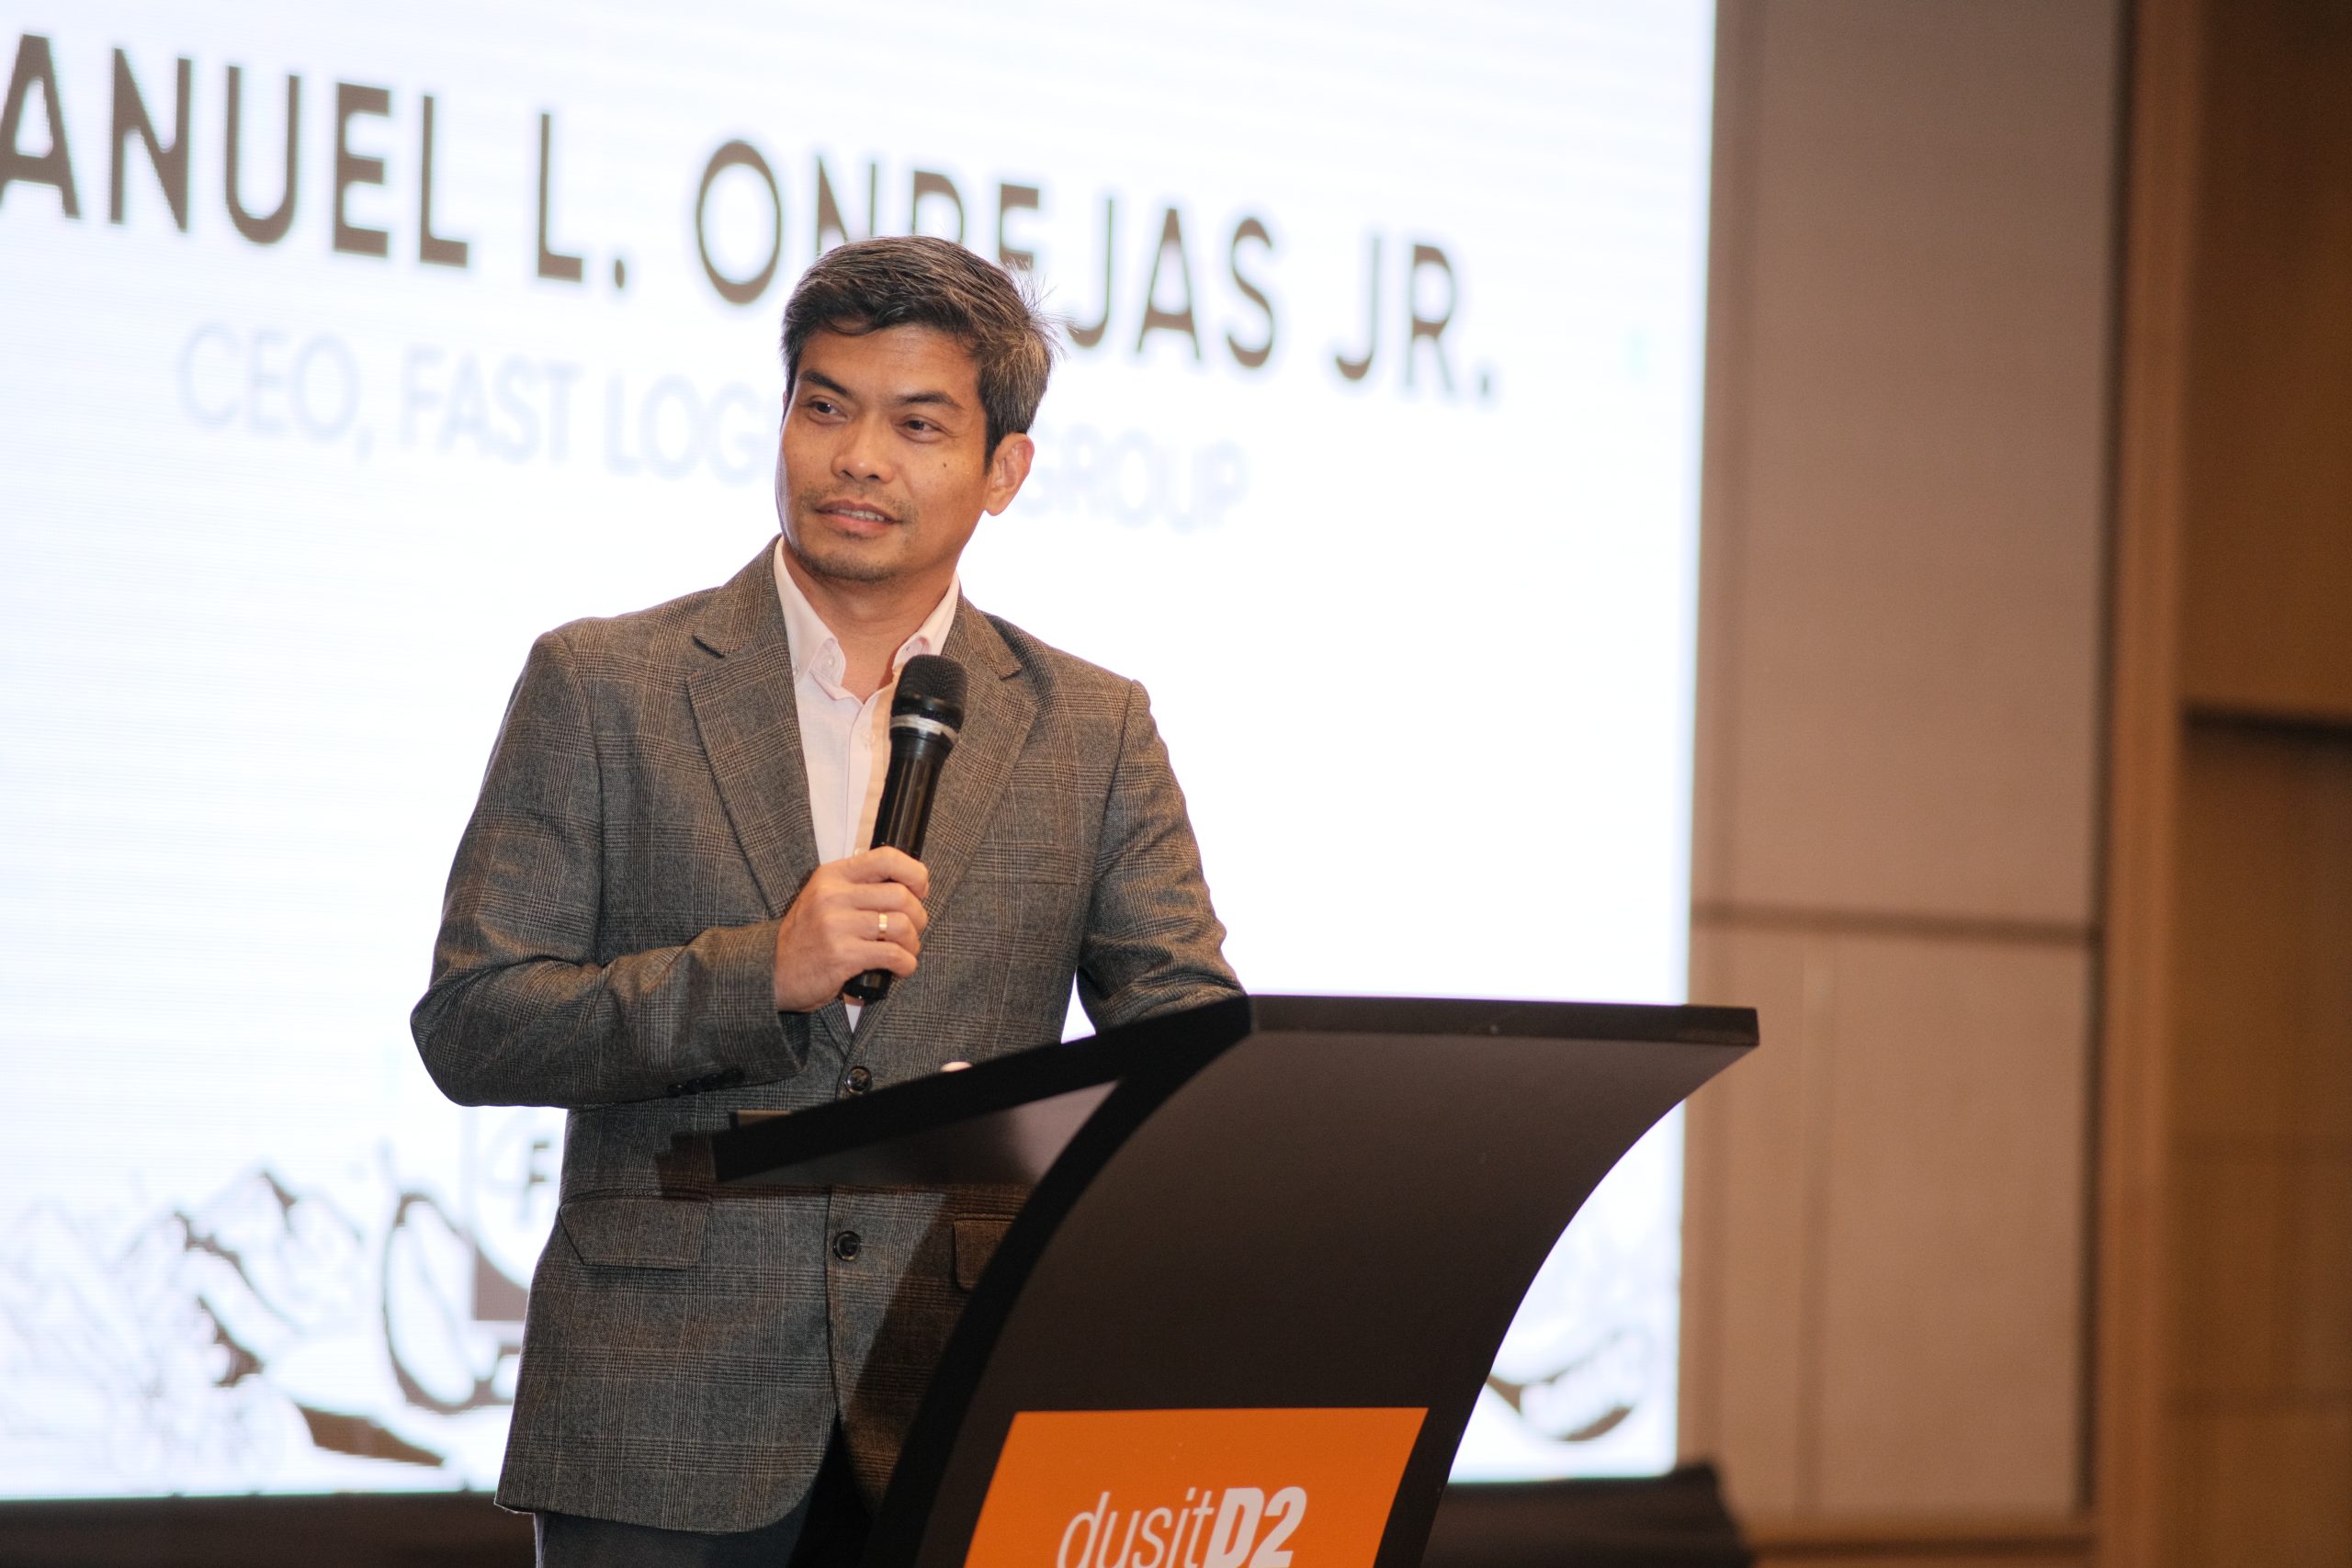 CEO - Logistics of FAST Logistics Group Manuel Onrejas Jr speaks before the FAST Solutions Roadshow in Davao City